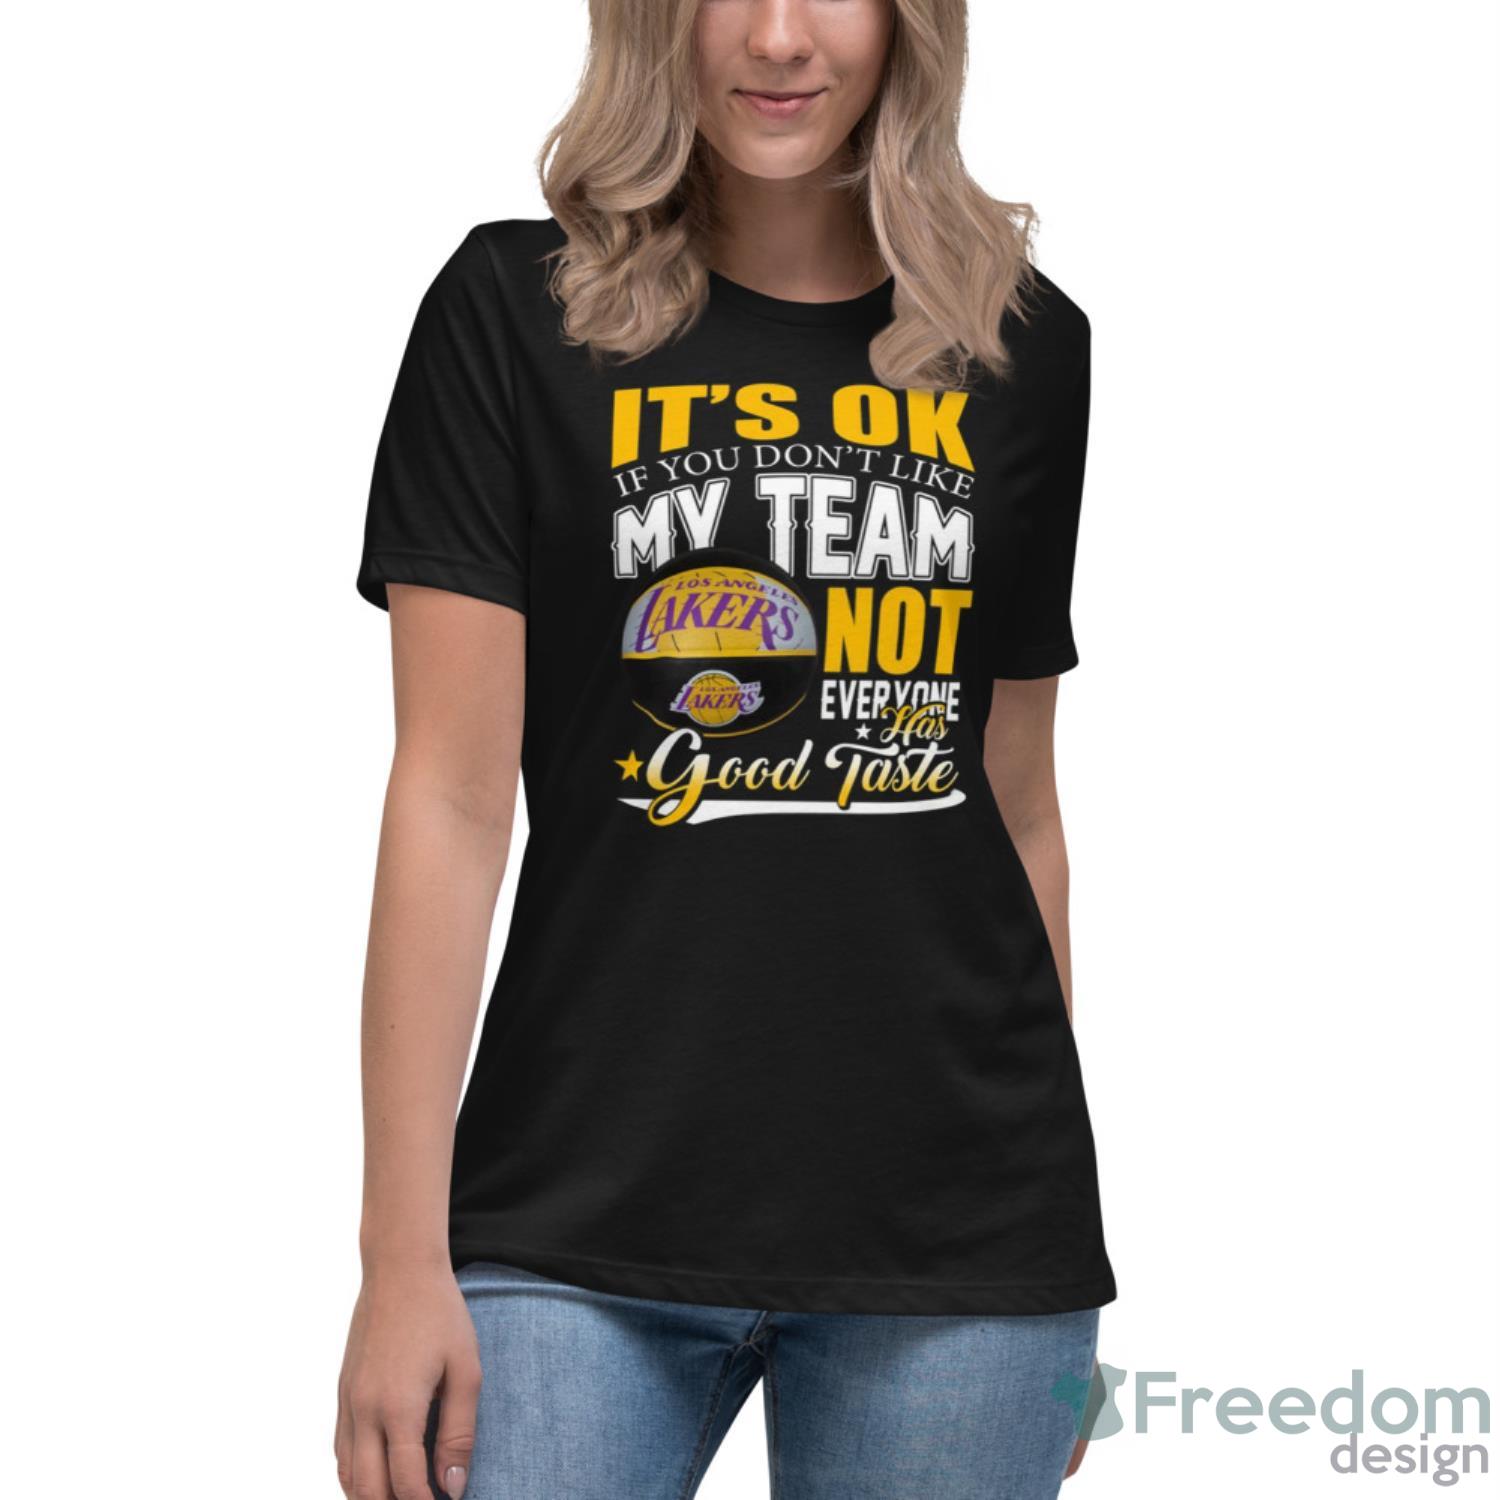 It's Ok If You Don't Like My Team Los Angeles Lakers Not Everyone Has Good  Taste Basketball T Shirt - Freedomdesign